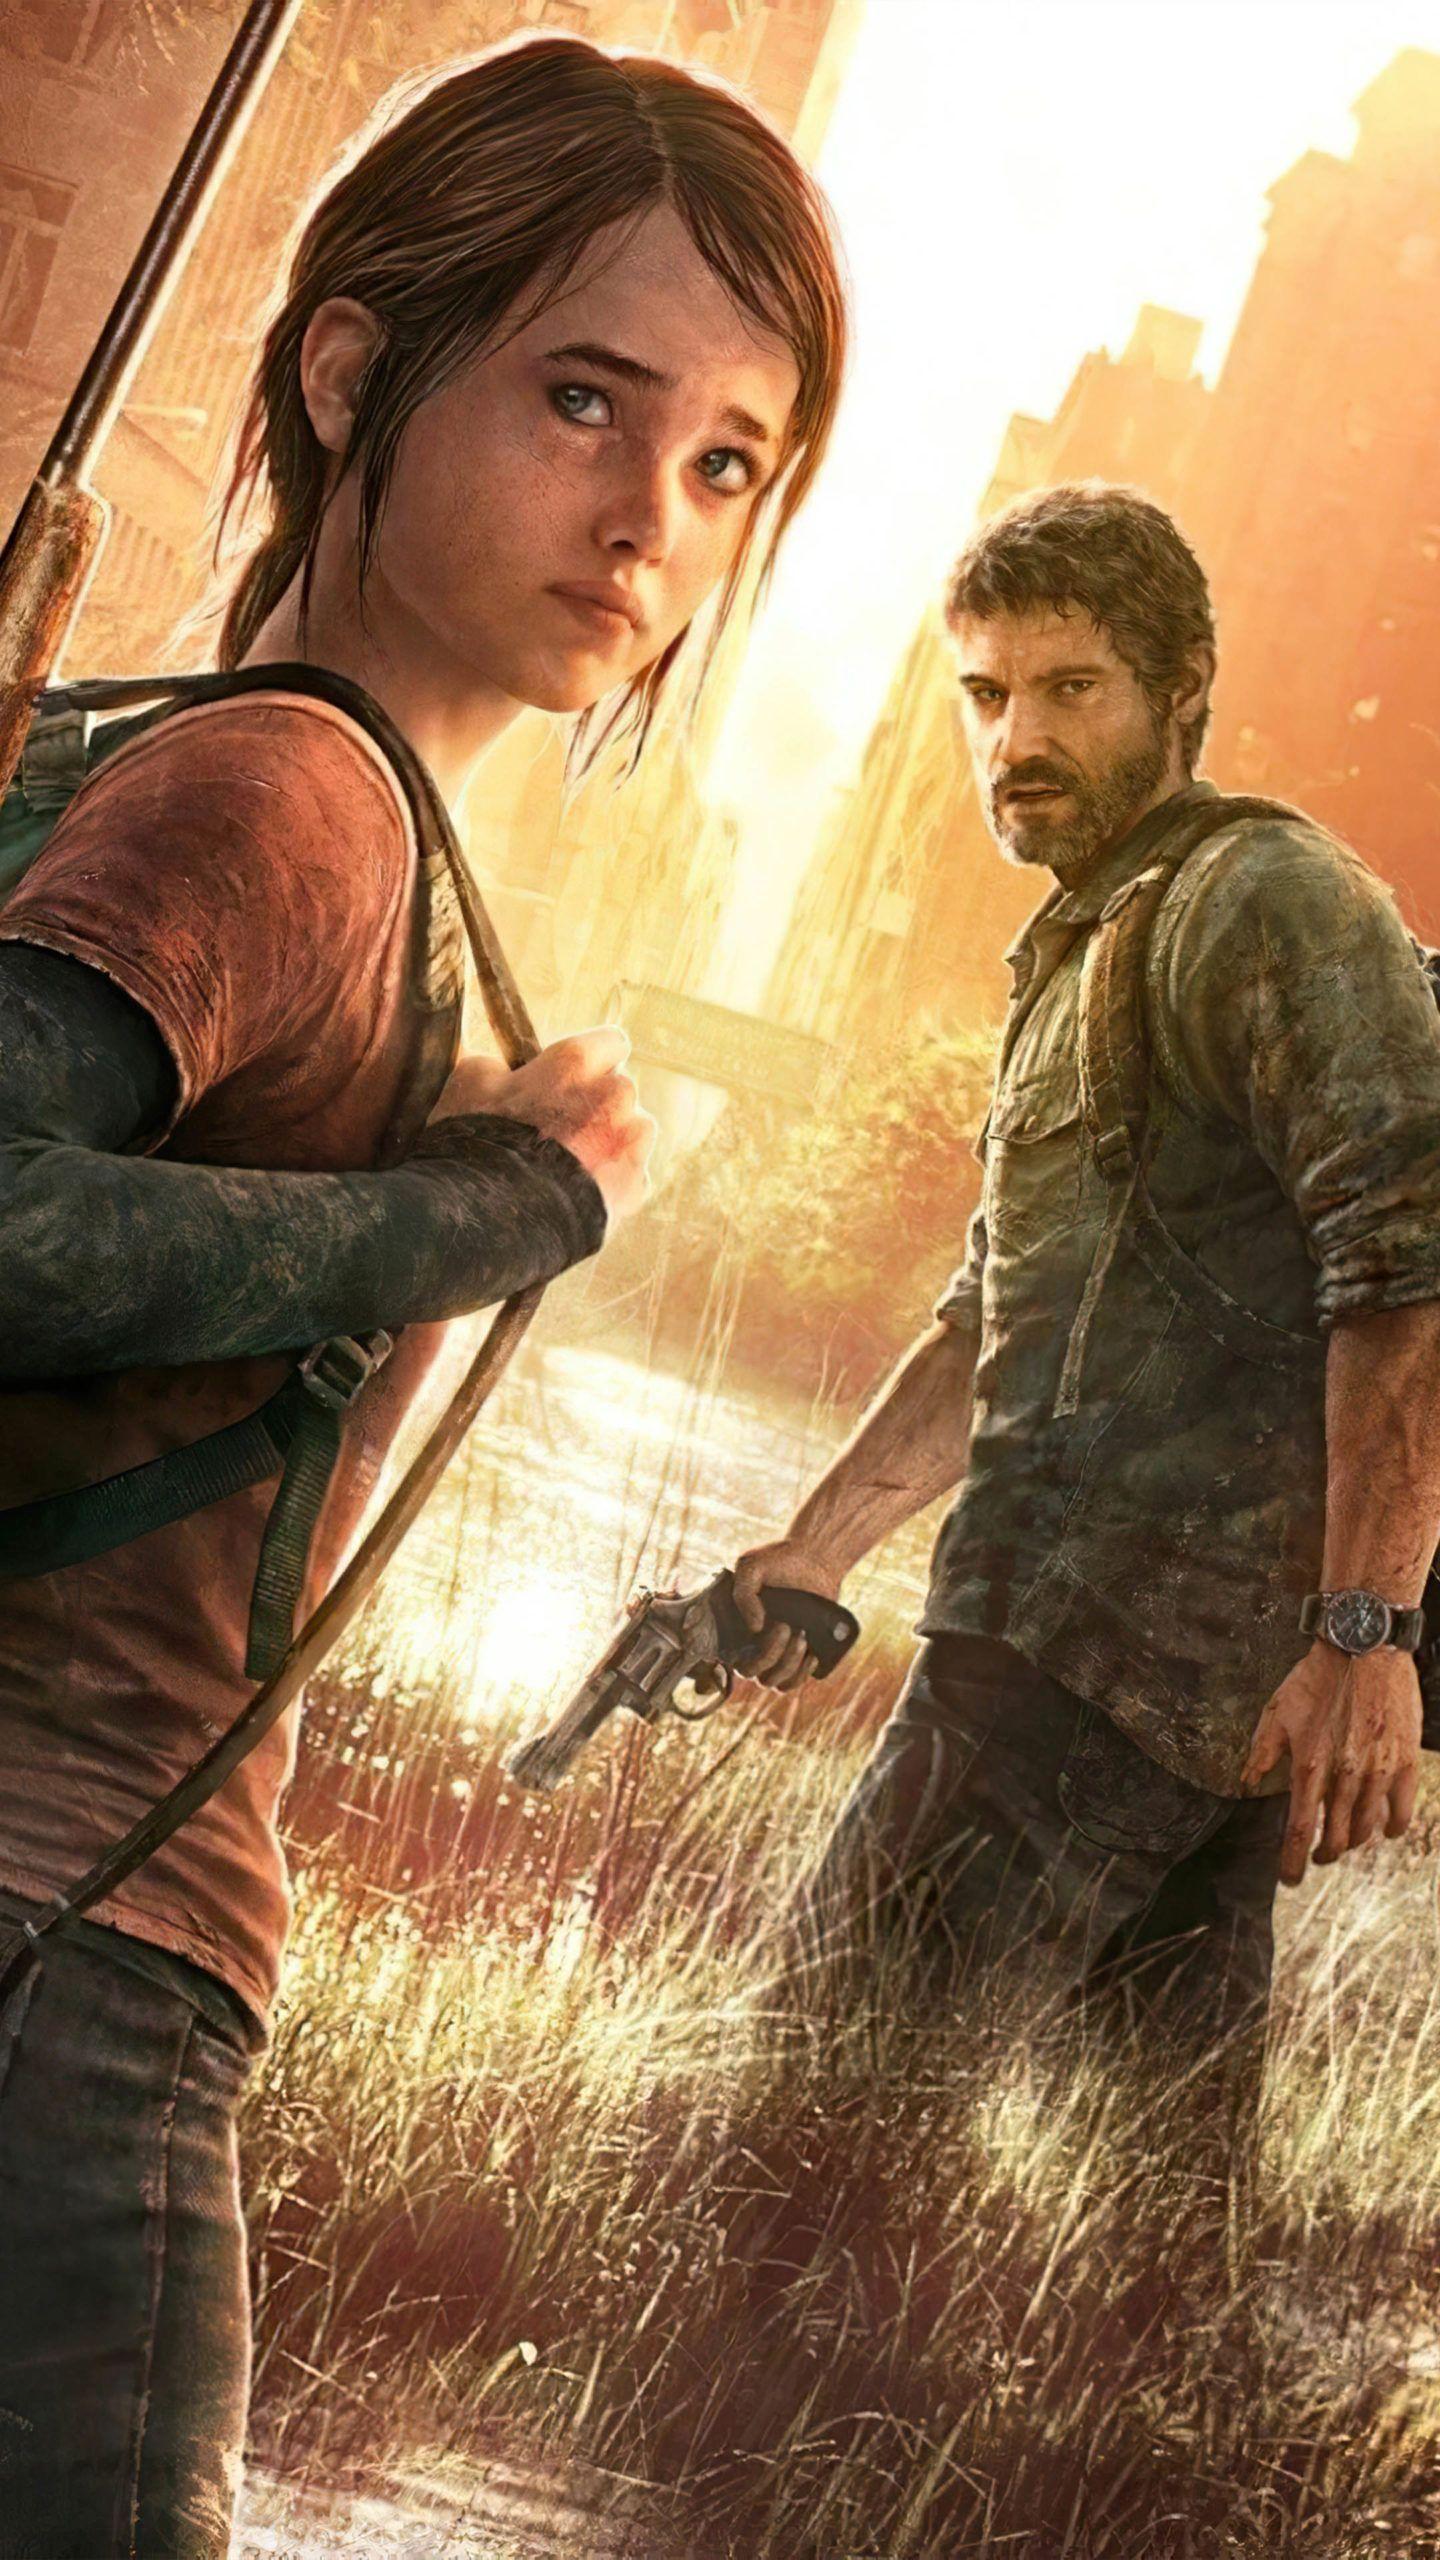 Joel The Last Of US Wallpaper,HD Games Wallpapers,4k Wallpapers,Images, Backgrounds,Photos and Pictures